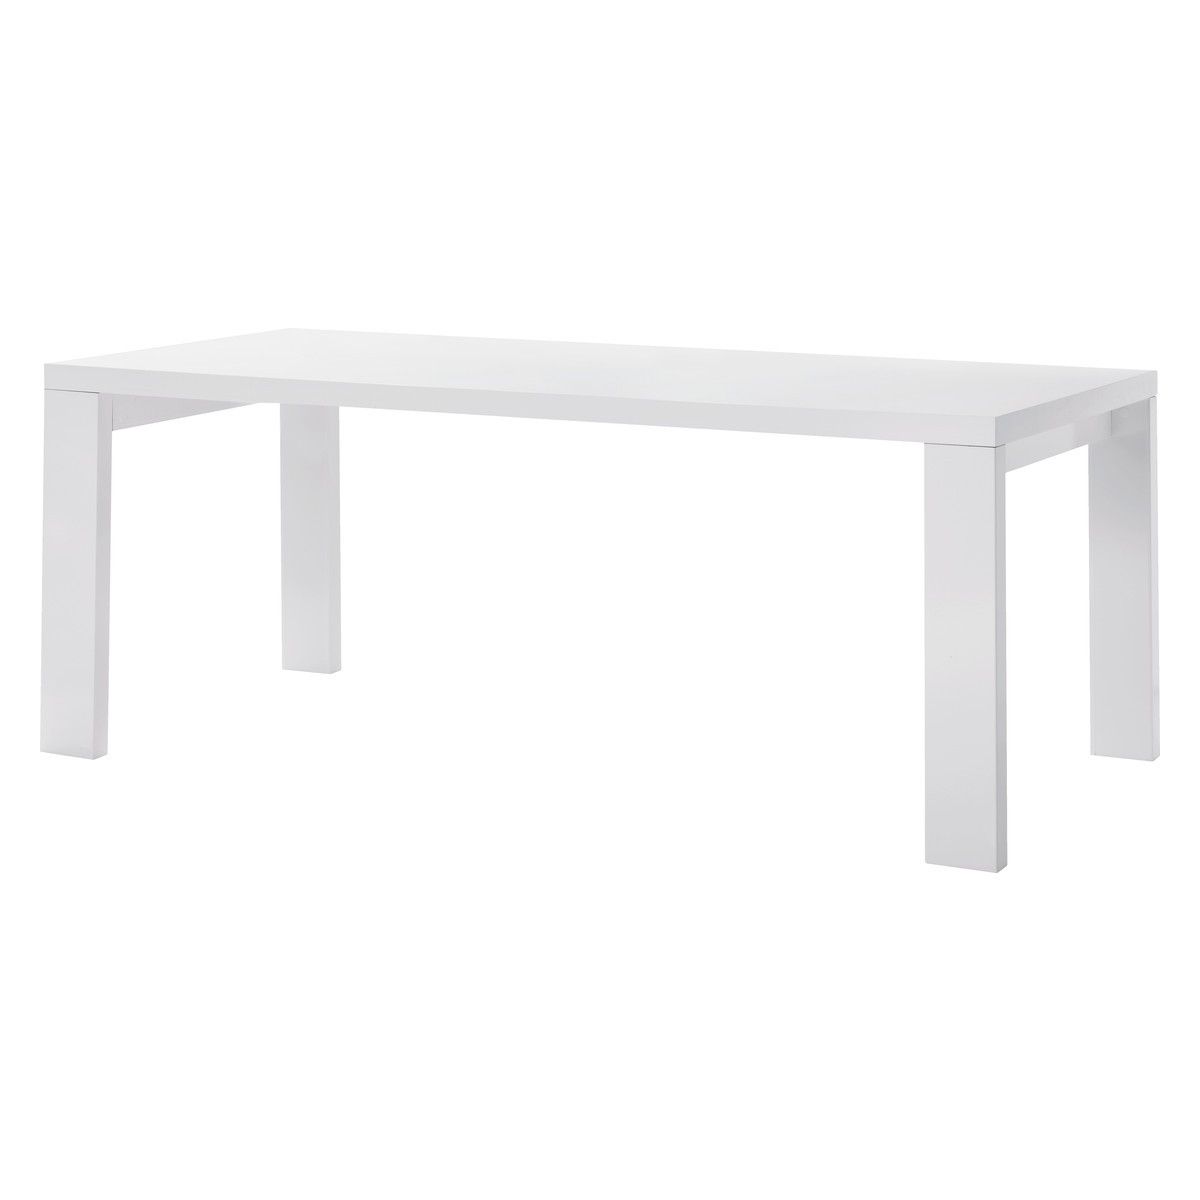 White Dining Tables 8 Seater Pertaining To 2018 Asper 8 Seater White High Gloss Dining Table (Photo 5 of 25)